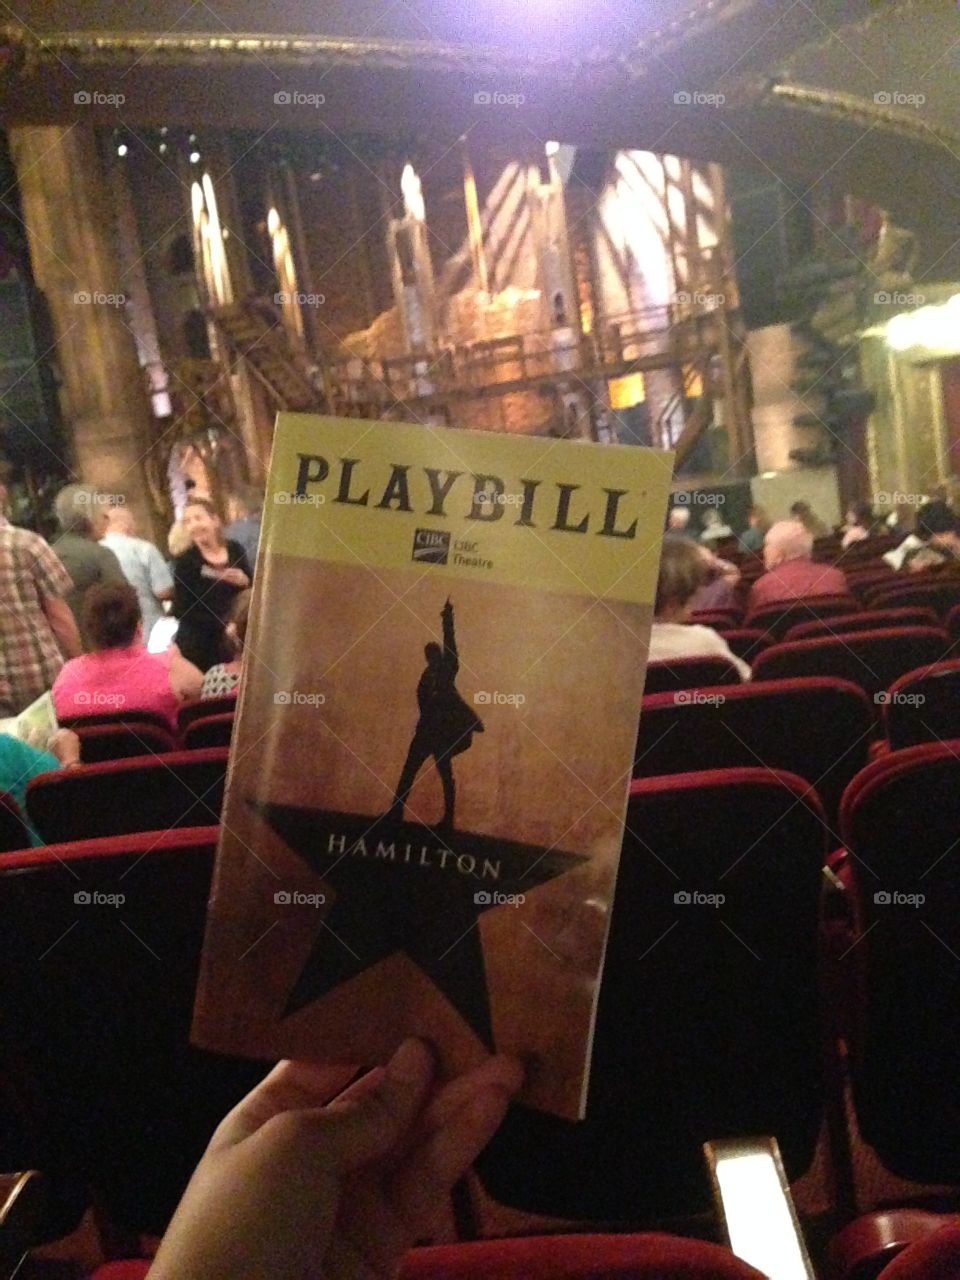 Hamilton Playbill in front of the Hamilton stage in Chicago, Illinois 